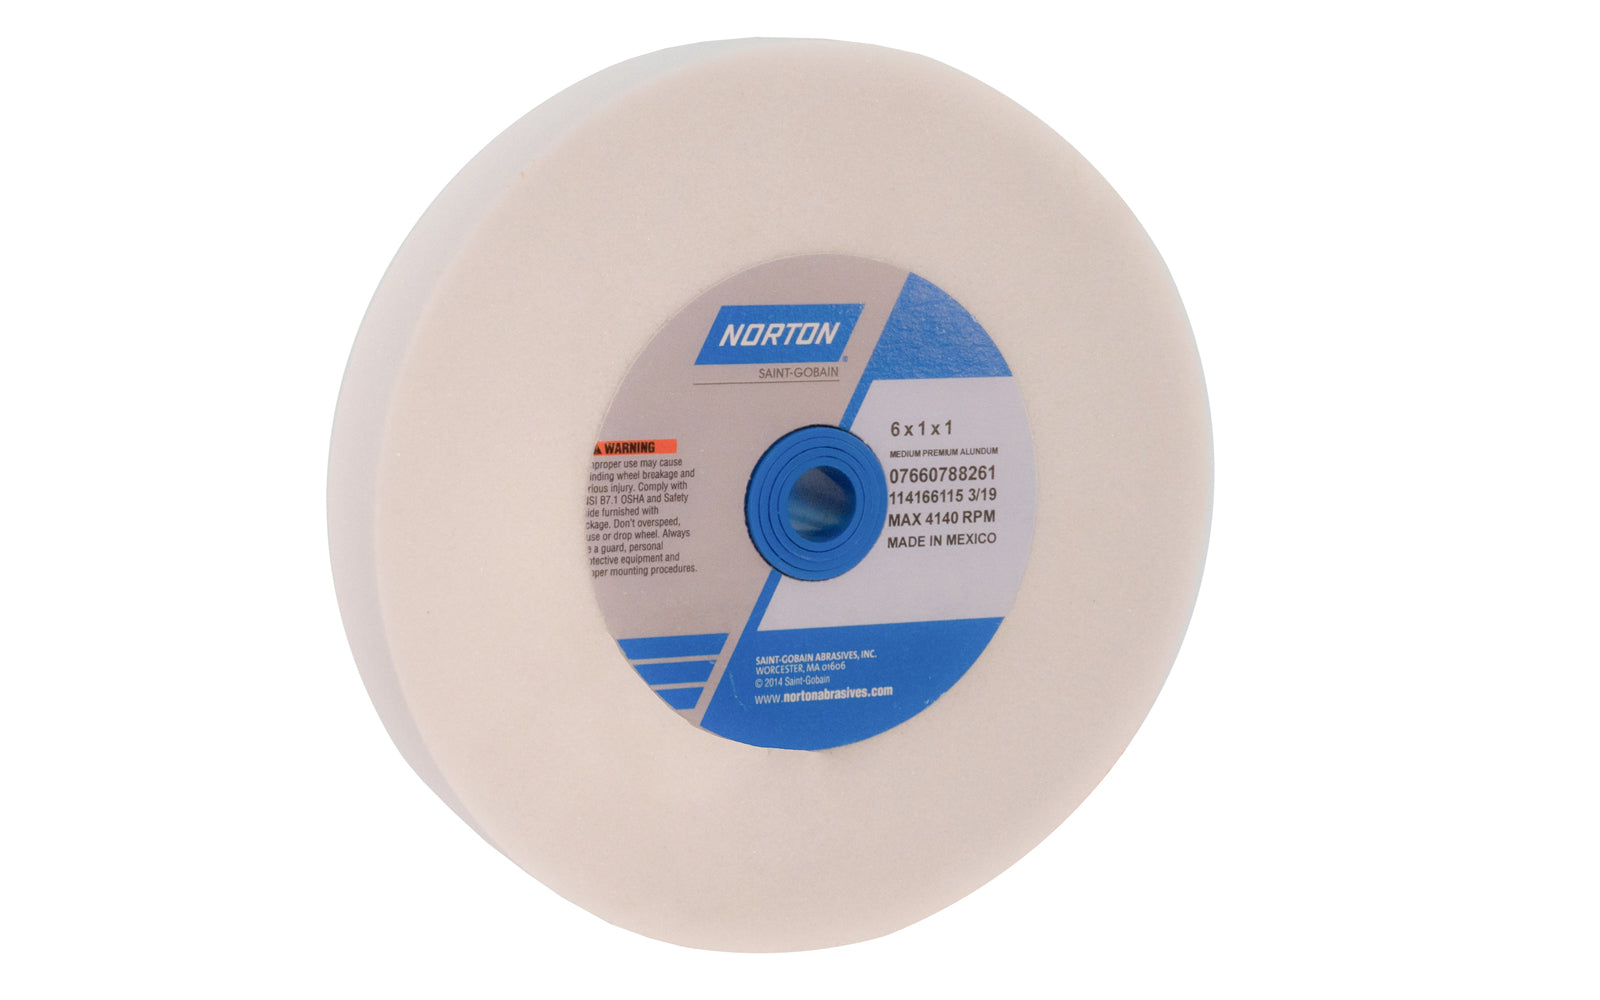 6" Aluminum Oxide Bench Grinding Wheel made by Norton. Designed for general purpose grinding on steel, high speed steels, & ferrous metals. Used for sharpening edges on tools. Materials that can be worked on include:  6" diameter of wheel. 1" thickness. 60 grit.  